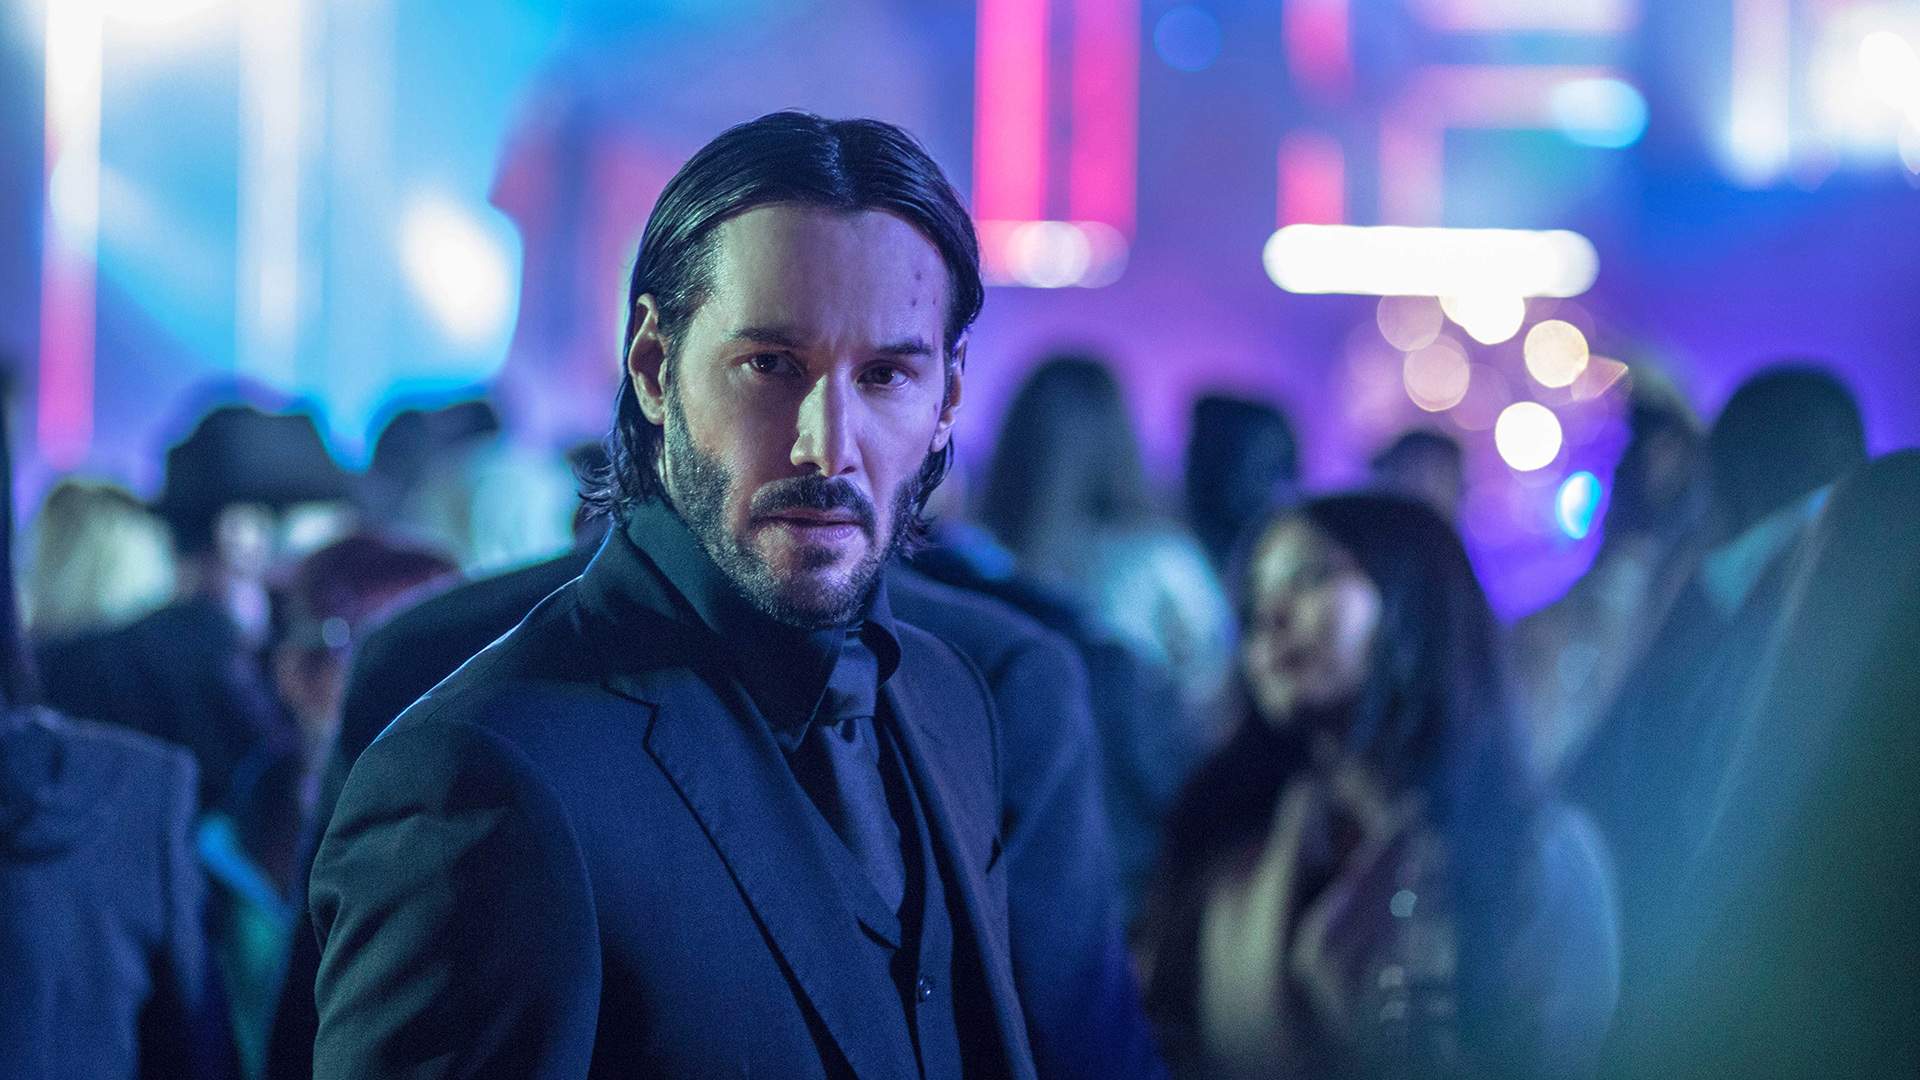 A 'John Wick' Roller Coaster Is a Real Thing That You'll Be Able to Ride From Next Year